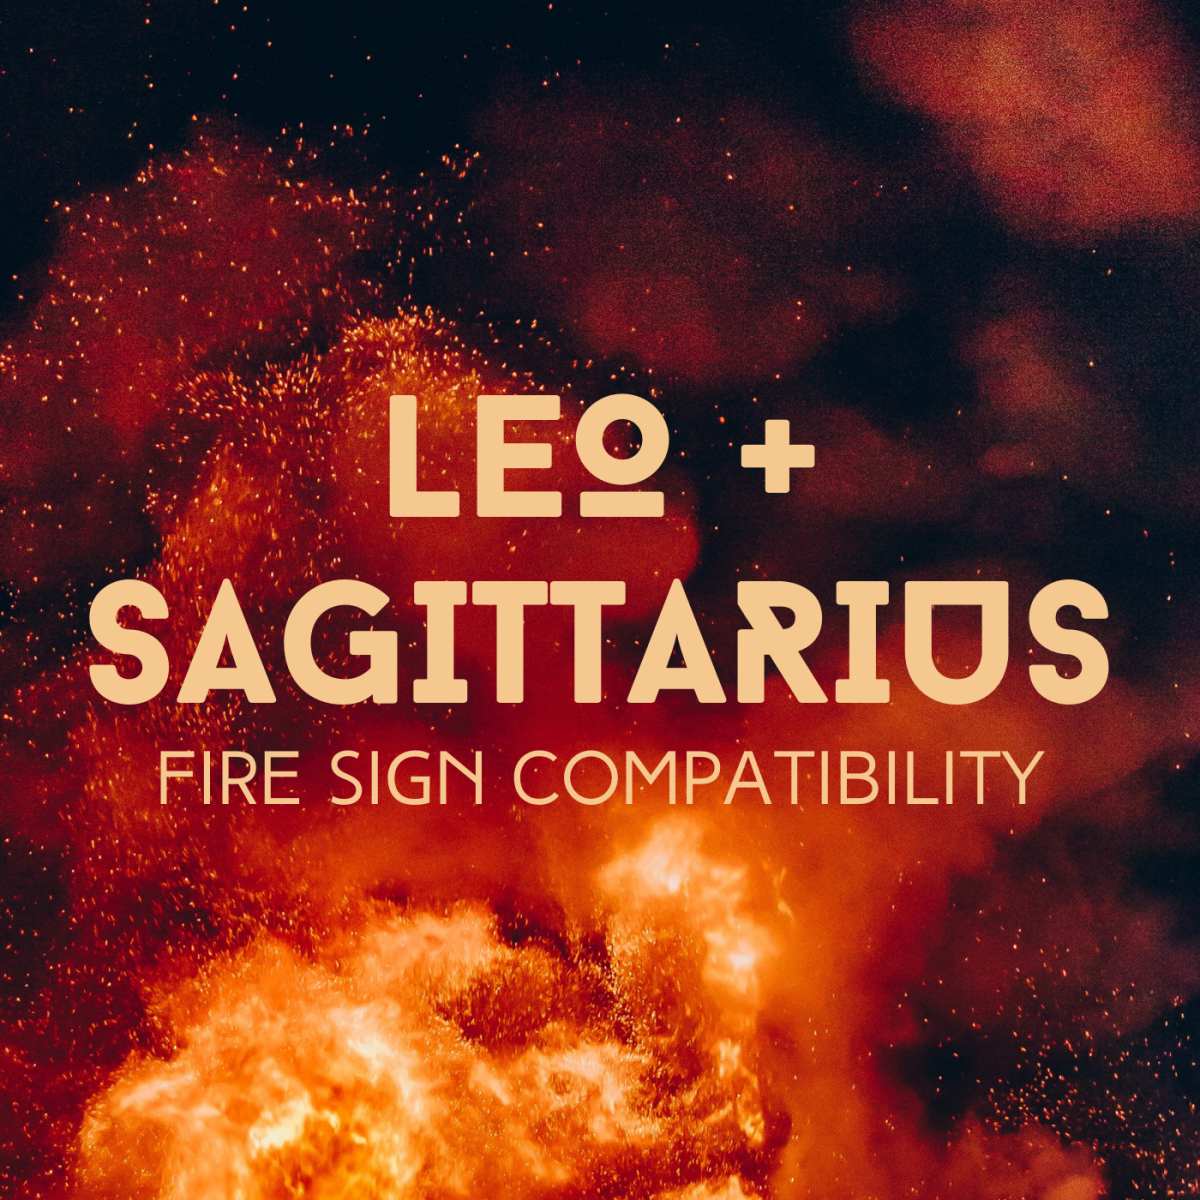 Leo (the lion) and Sagittarius (the centaur, archer, or wild horse) are both fire signs. Do they make a good couple?